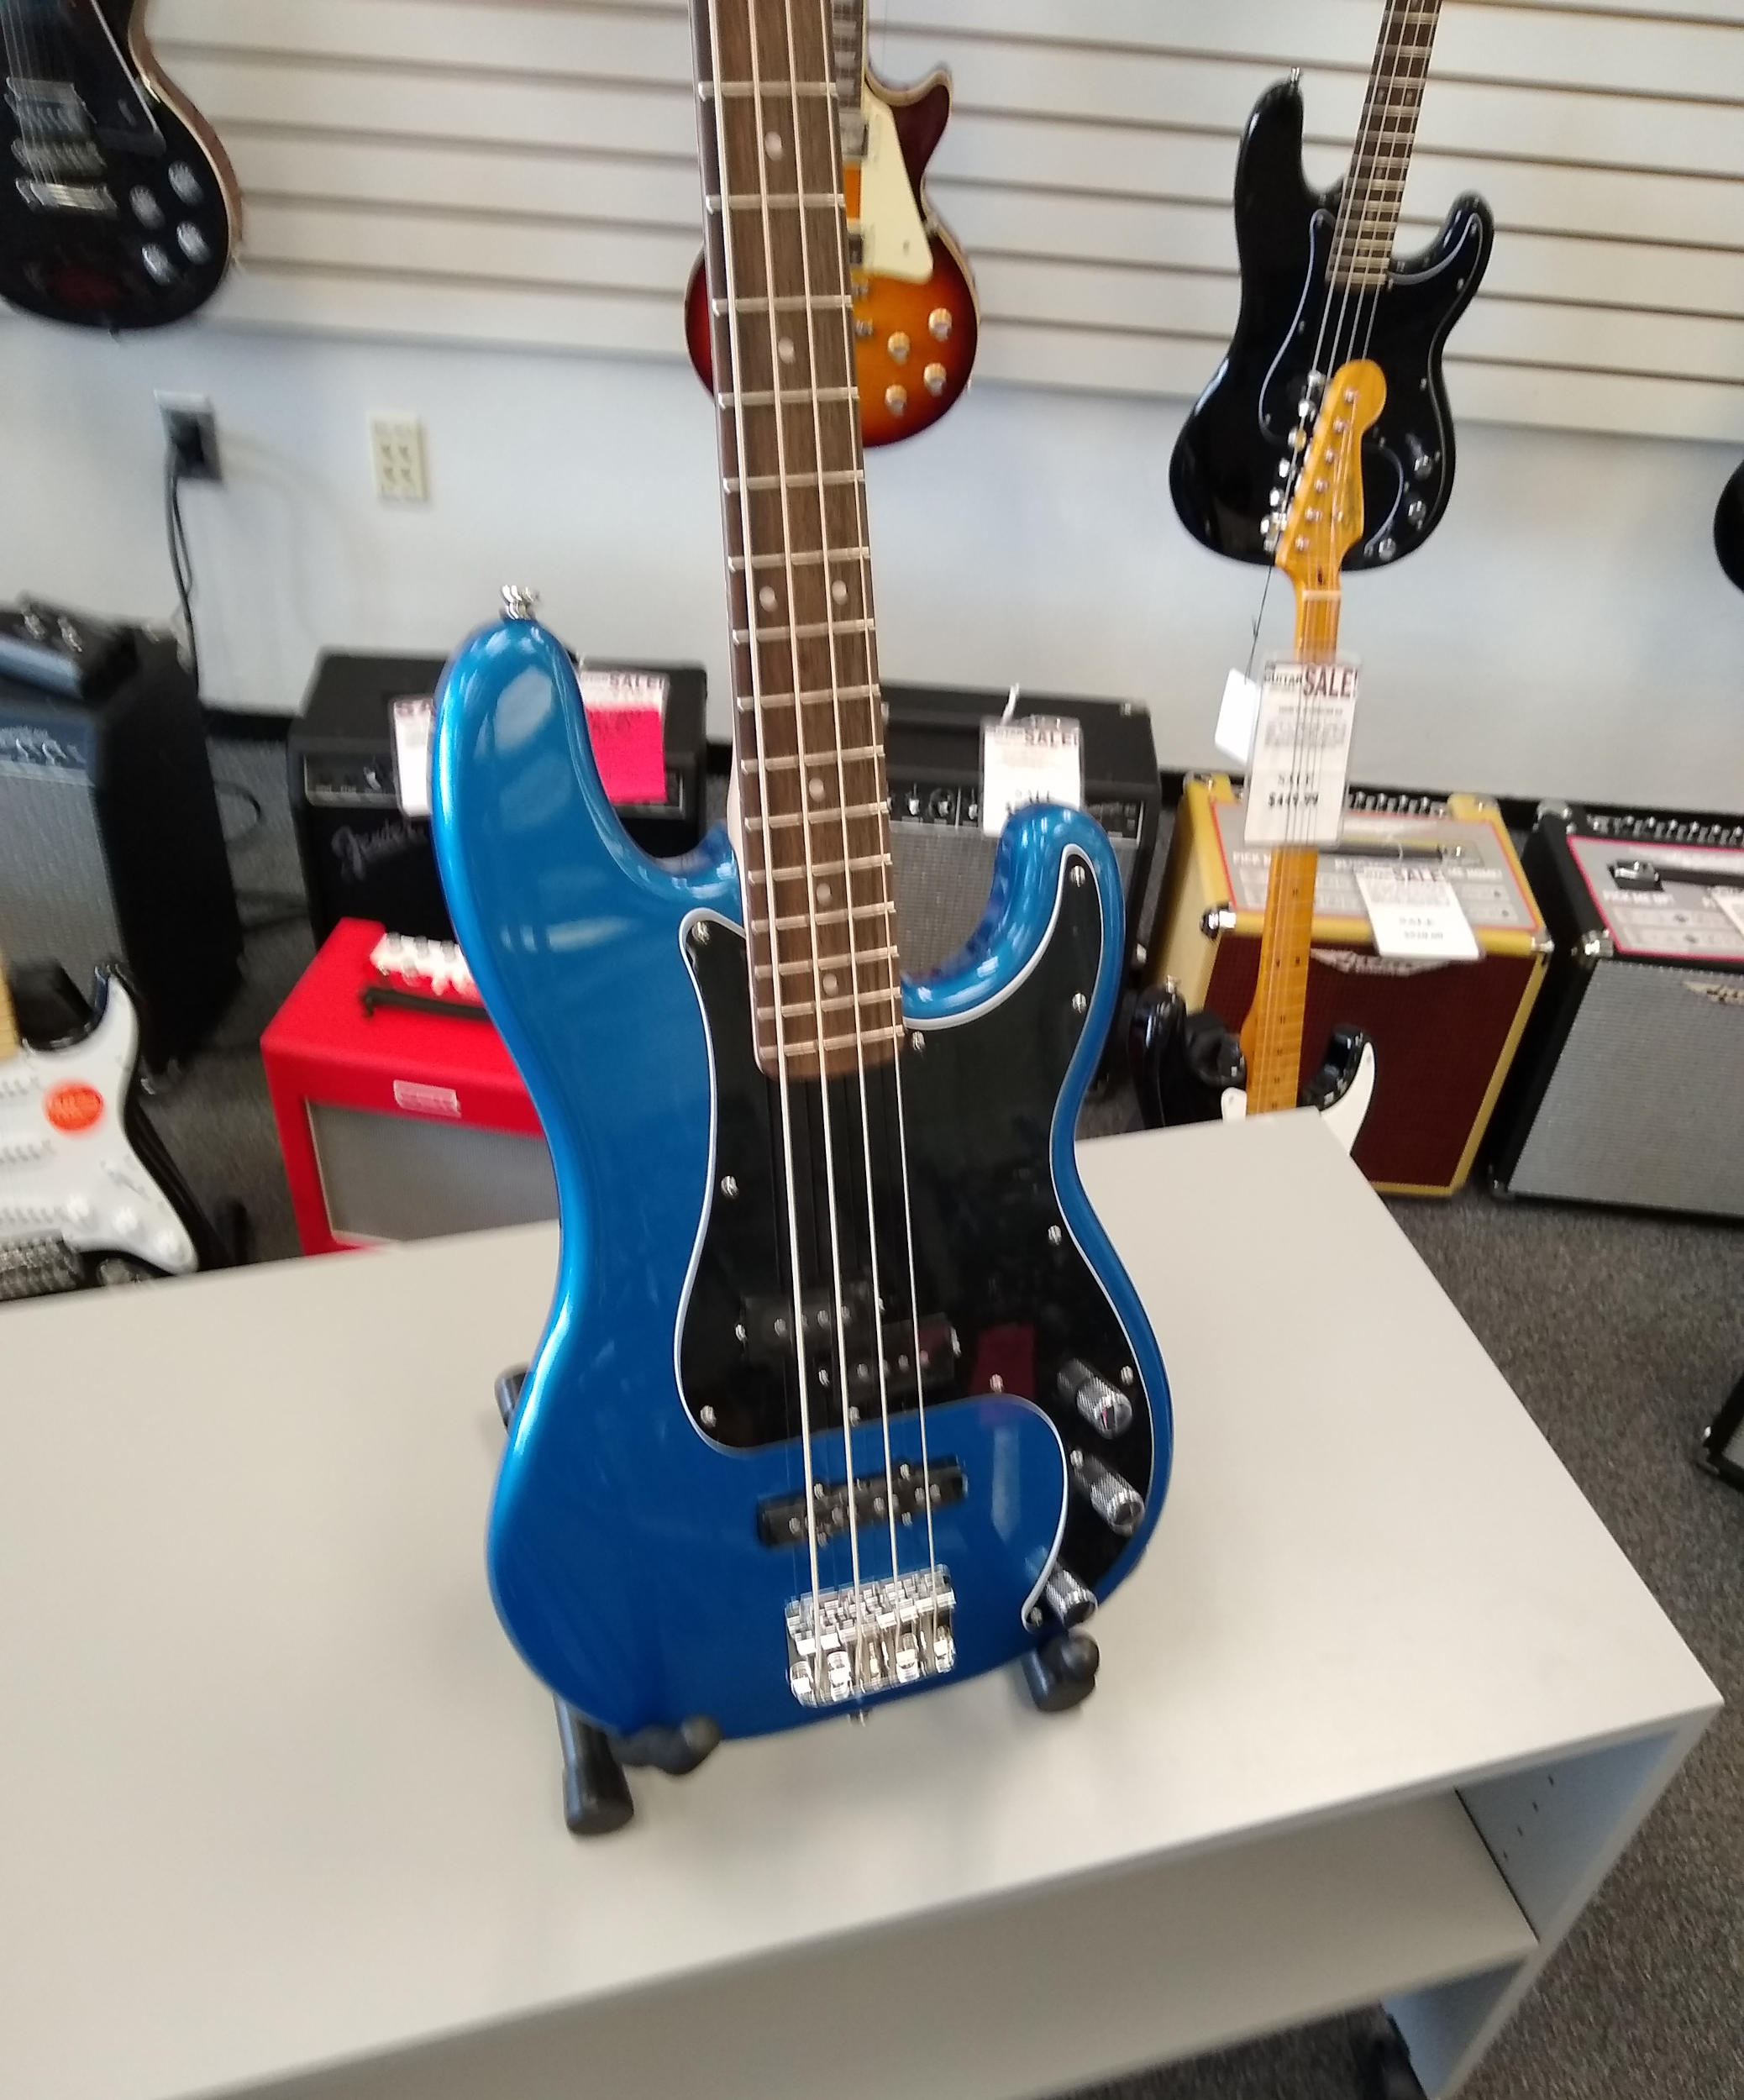 Squier Affinity P Bass Lake Placid Blue